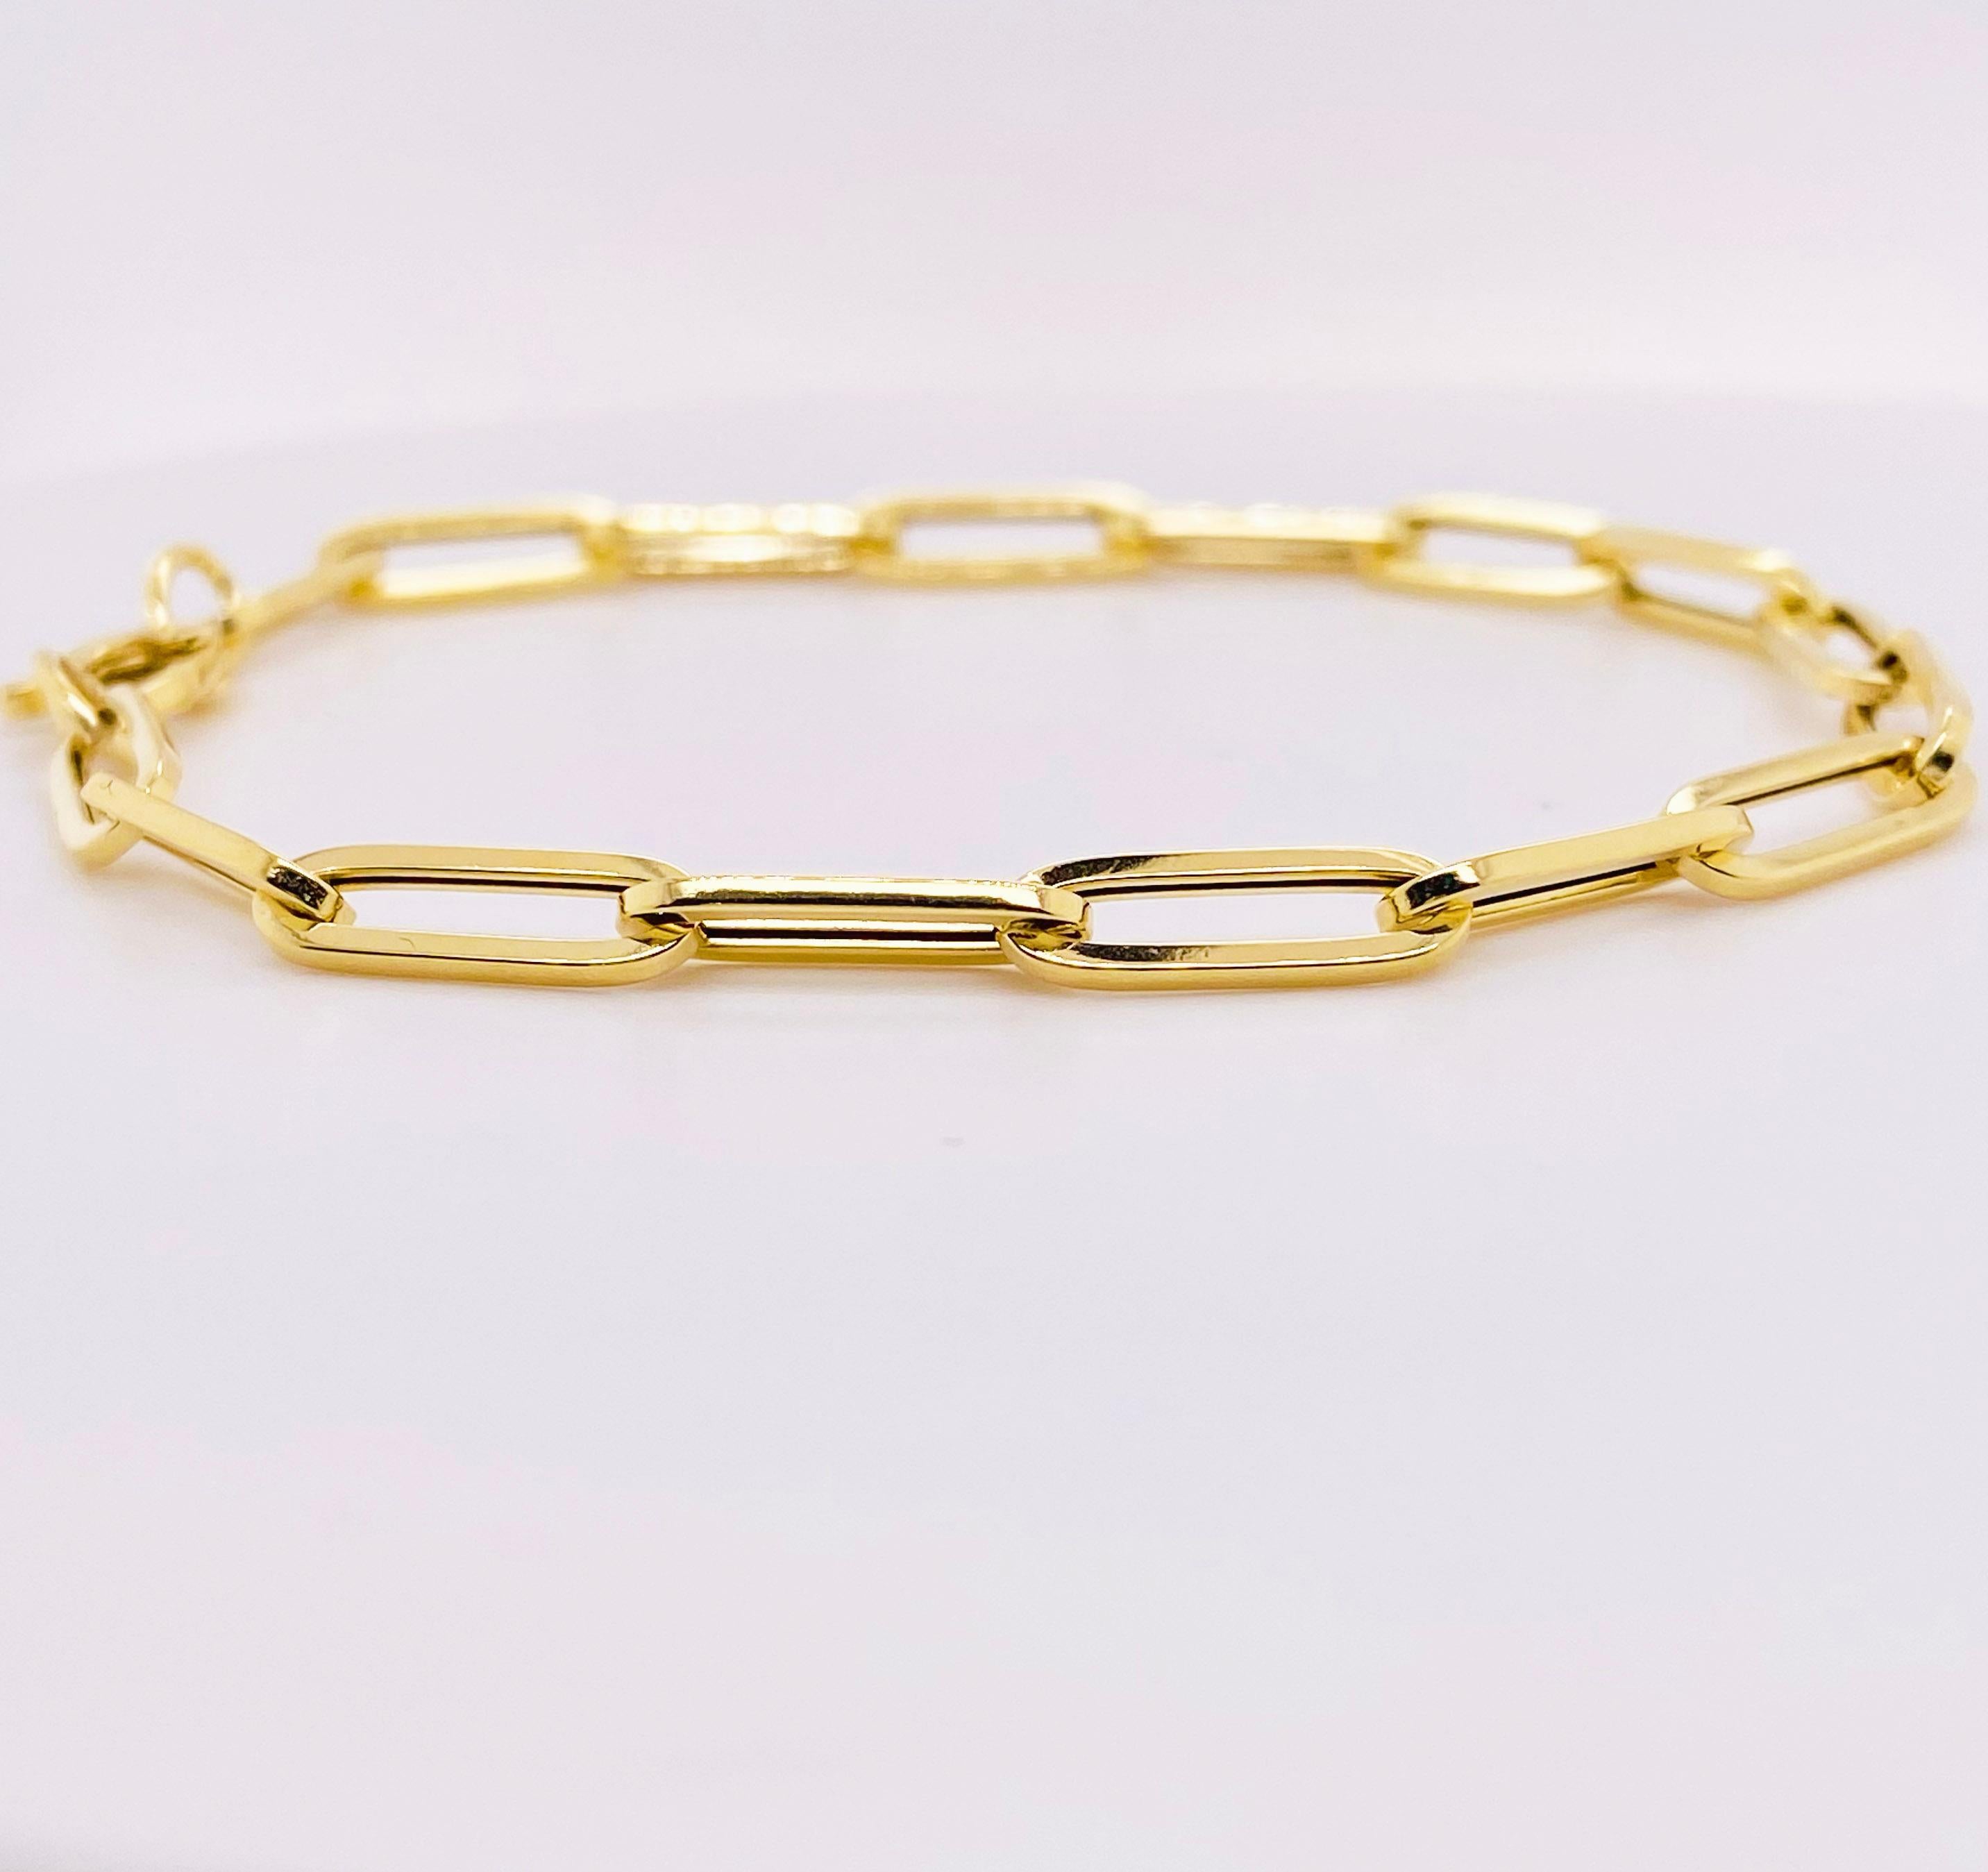 This paperclip bracelet is 2021 most popular designer bracelet. The bracelet is 4.4 millimeters wide and 7.5 inches long. It is perfect for a medium lady’s wrist or a small man’s wrist.  The rich 14 karat yellow gold is stunning! The bracelet weighs